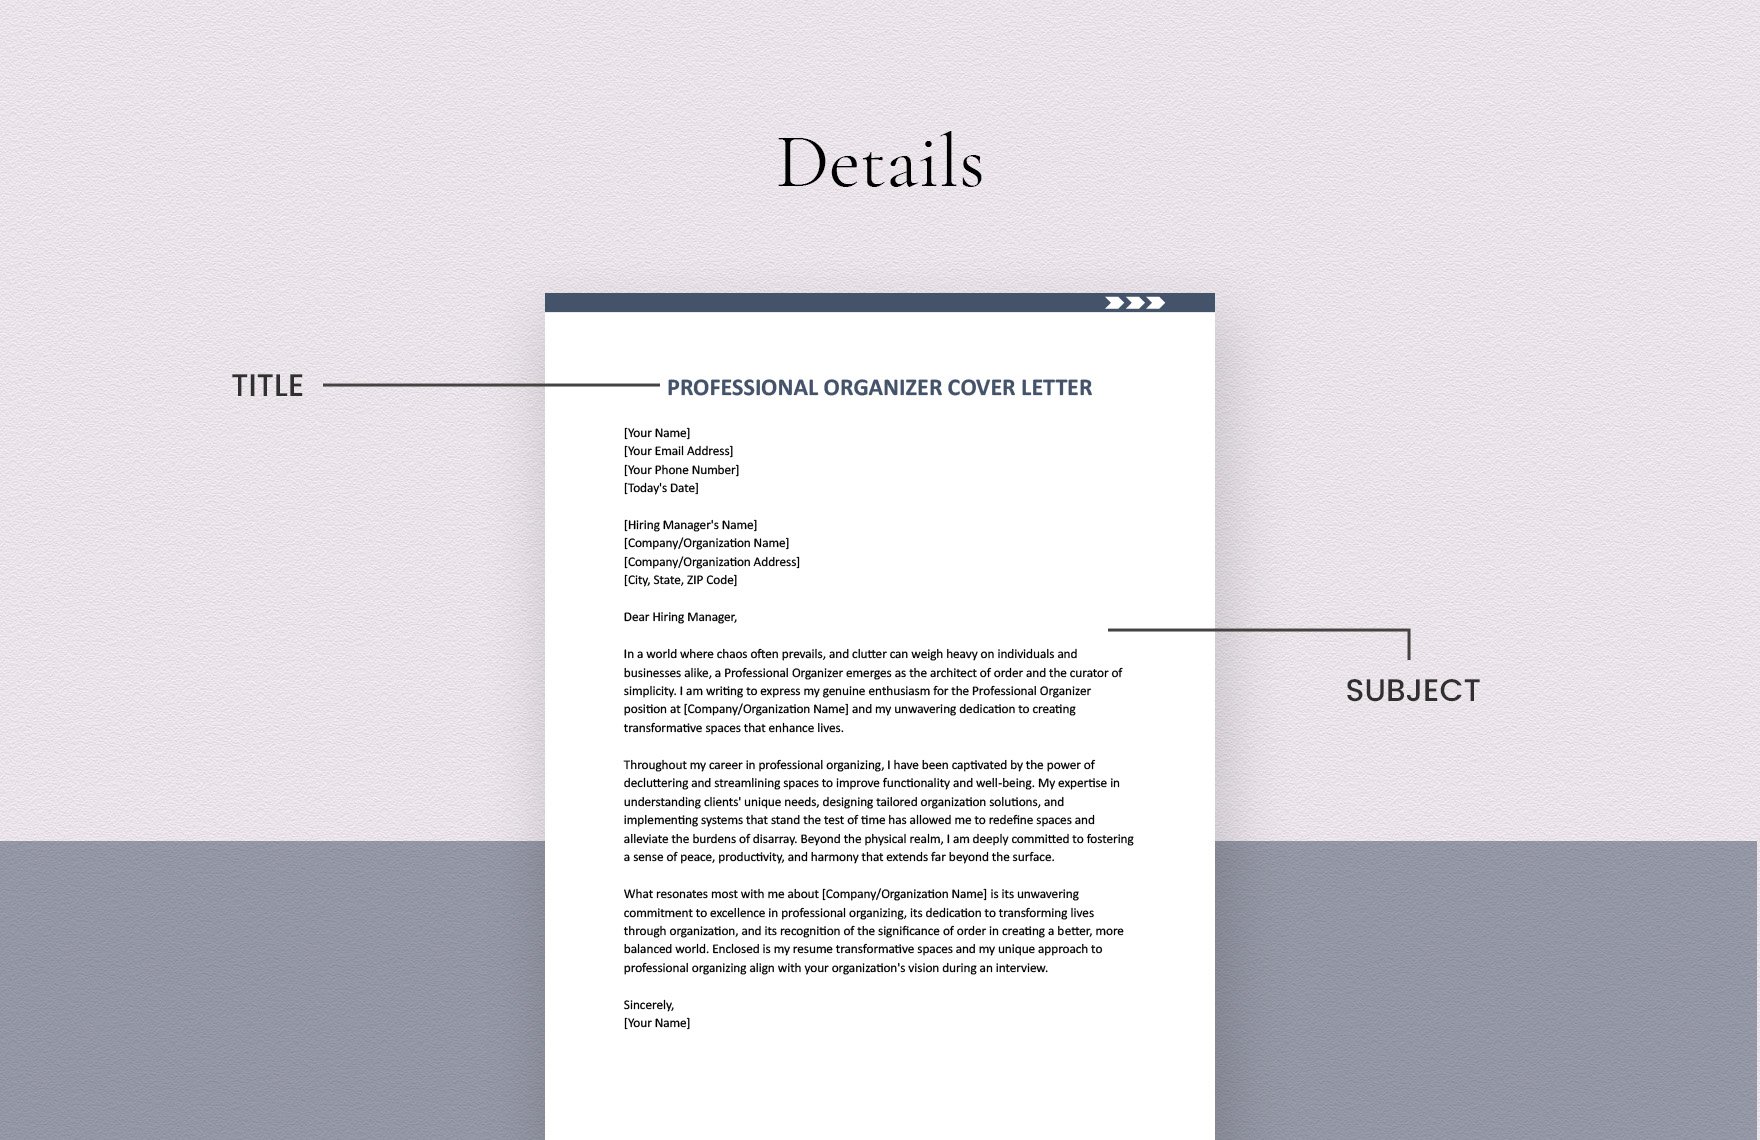 Professional Organizer Cover Letter